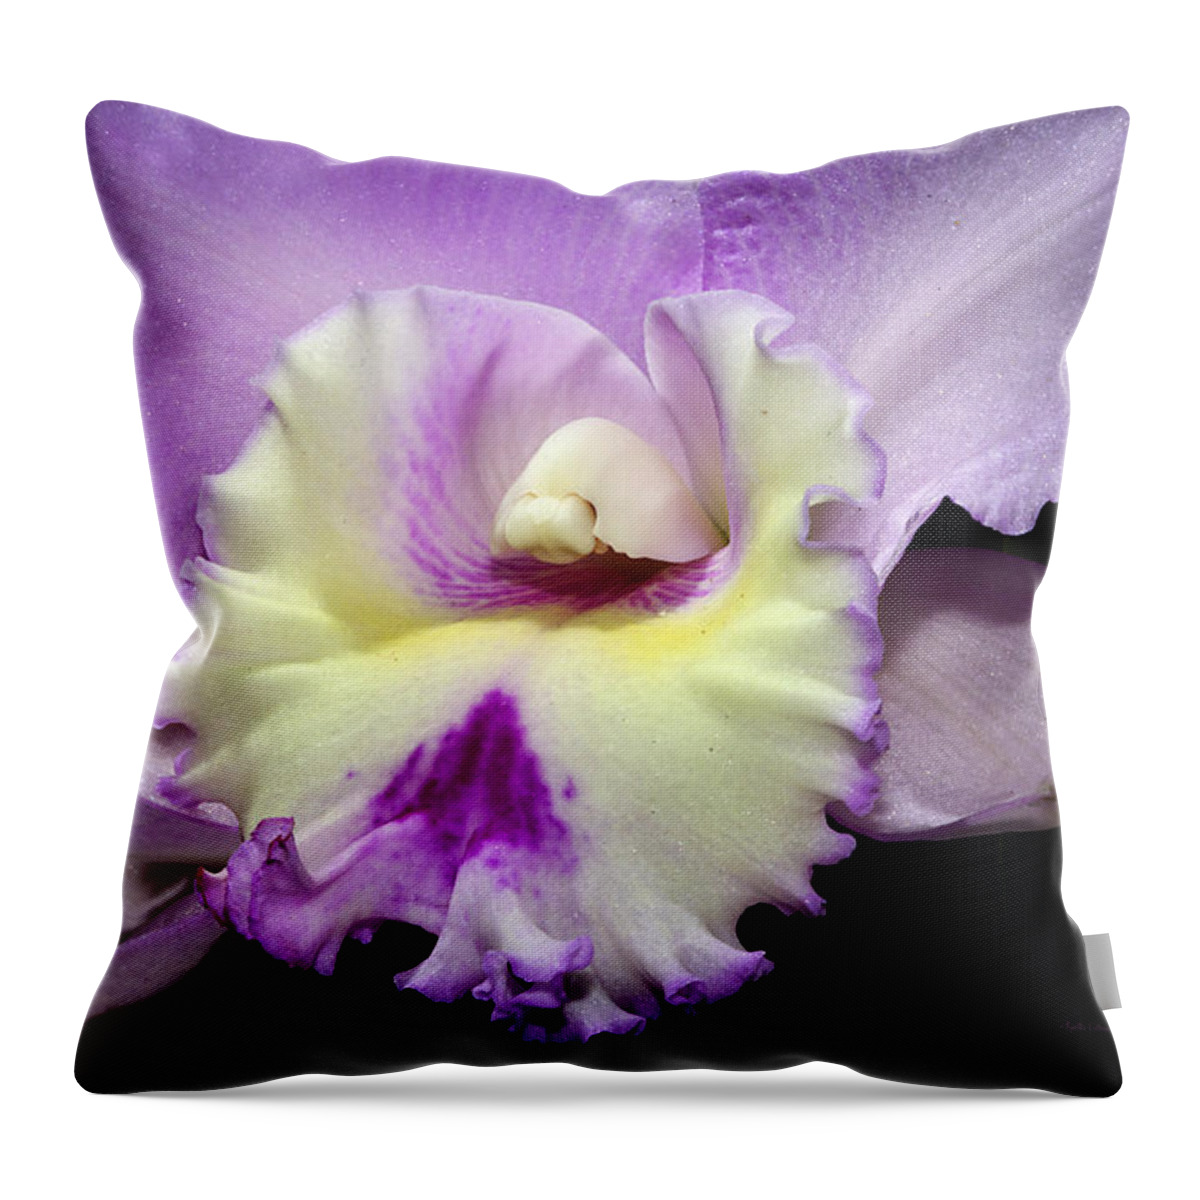 Orchid Throw Pillow featuring the photograph Delicate Violet Orchid by Phyllis Denton